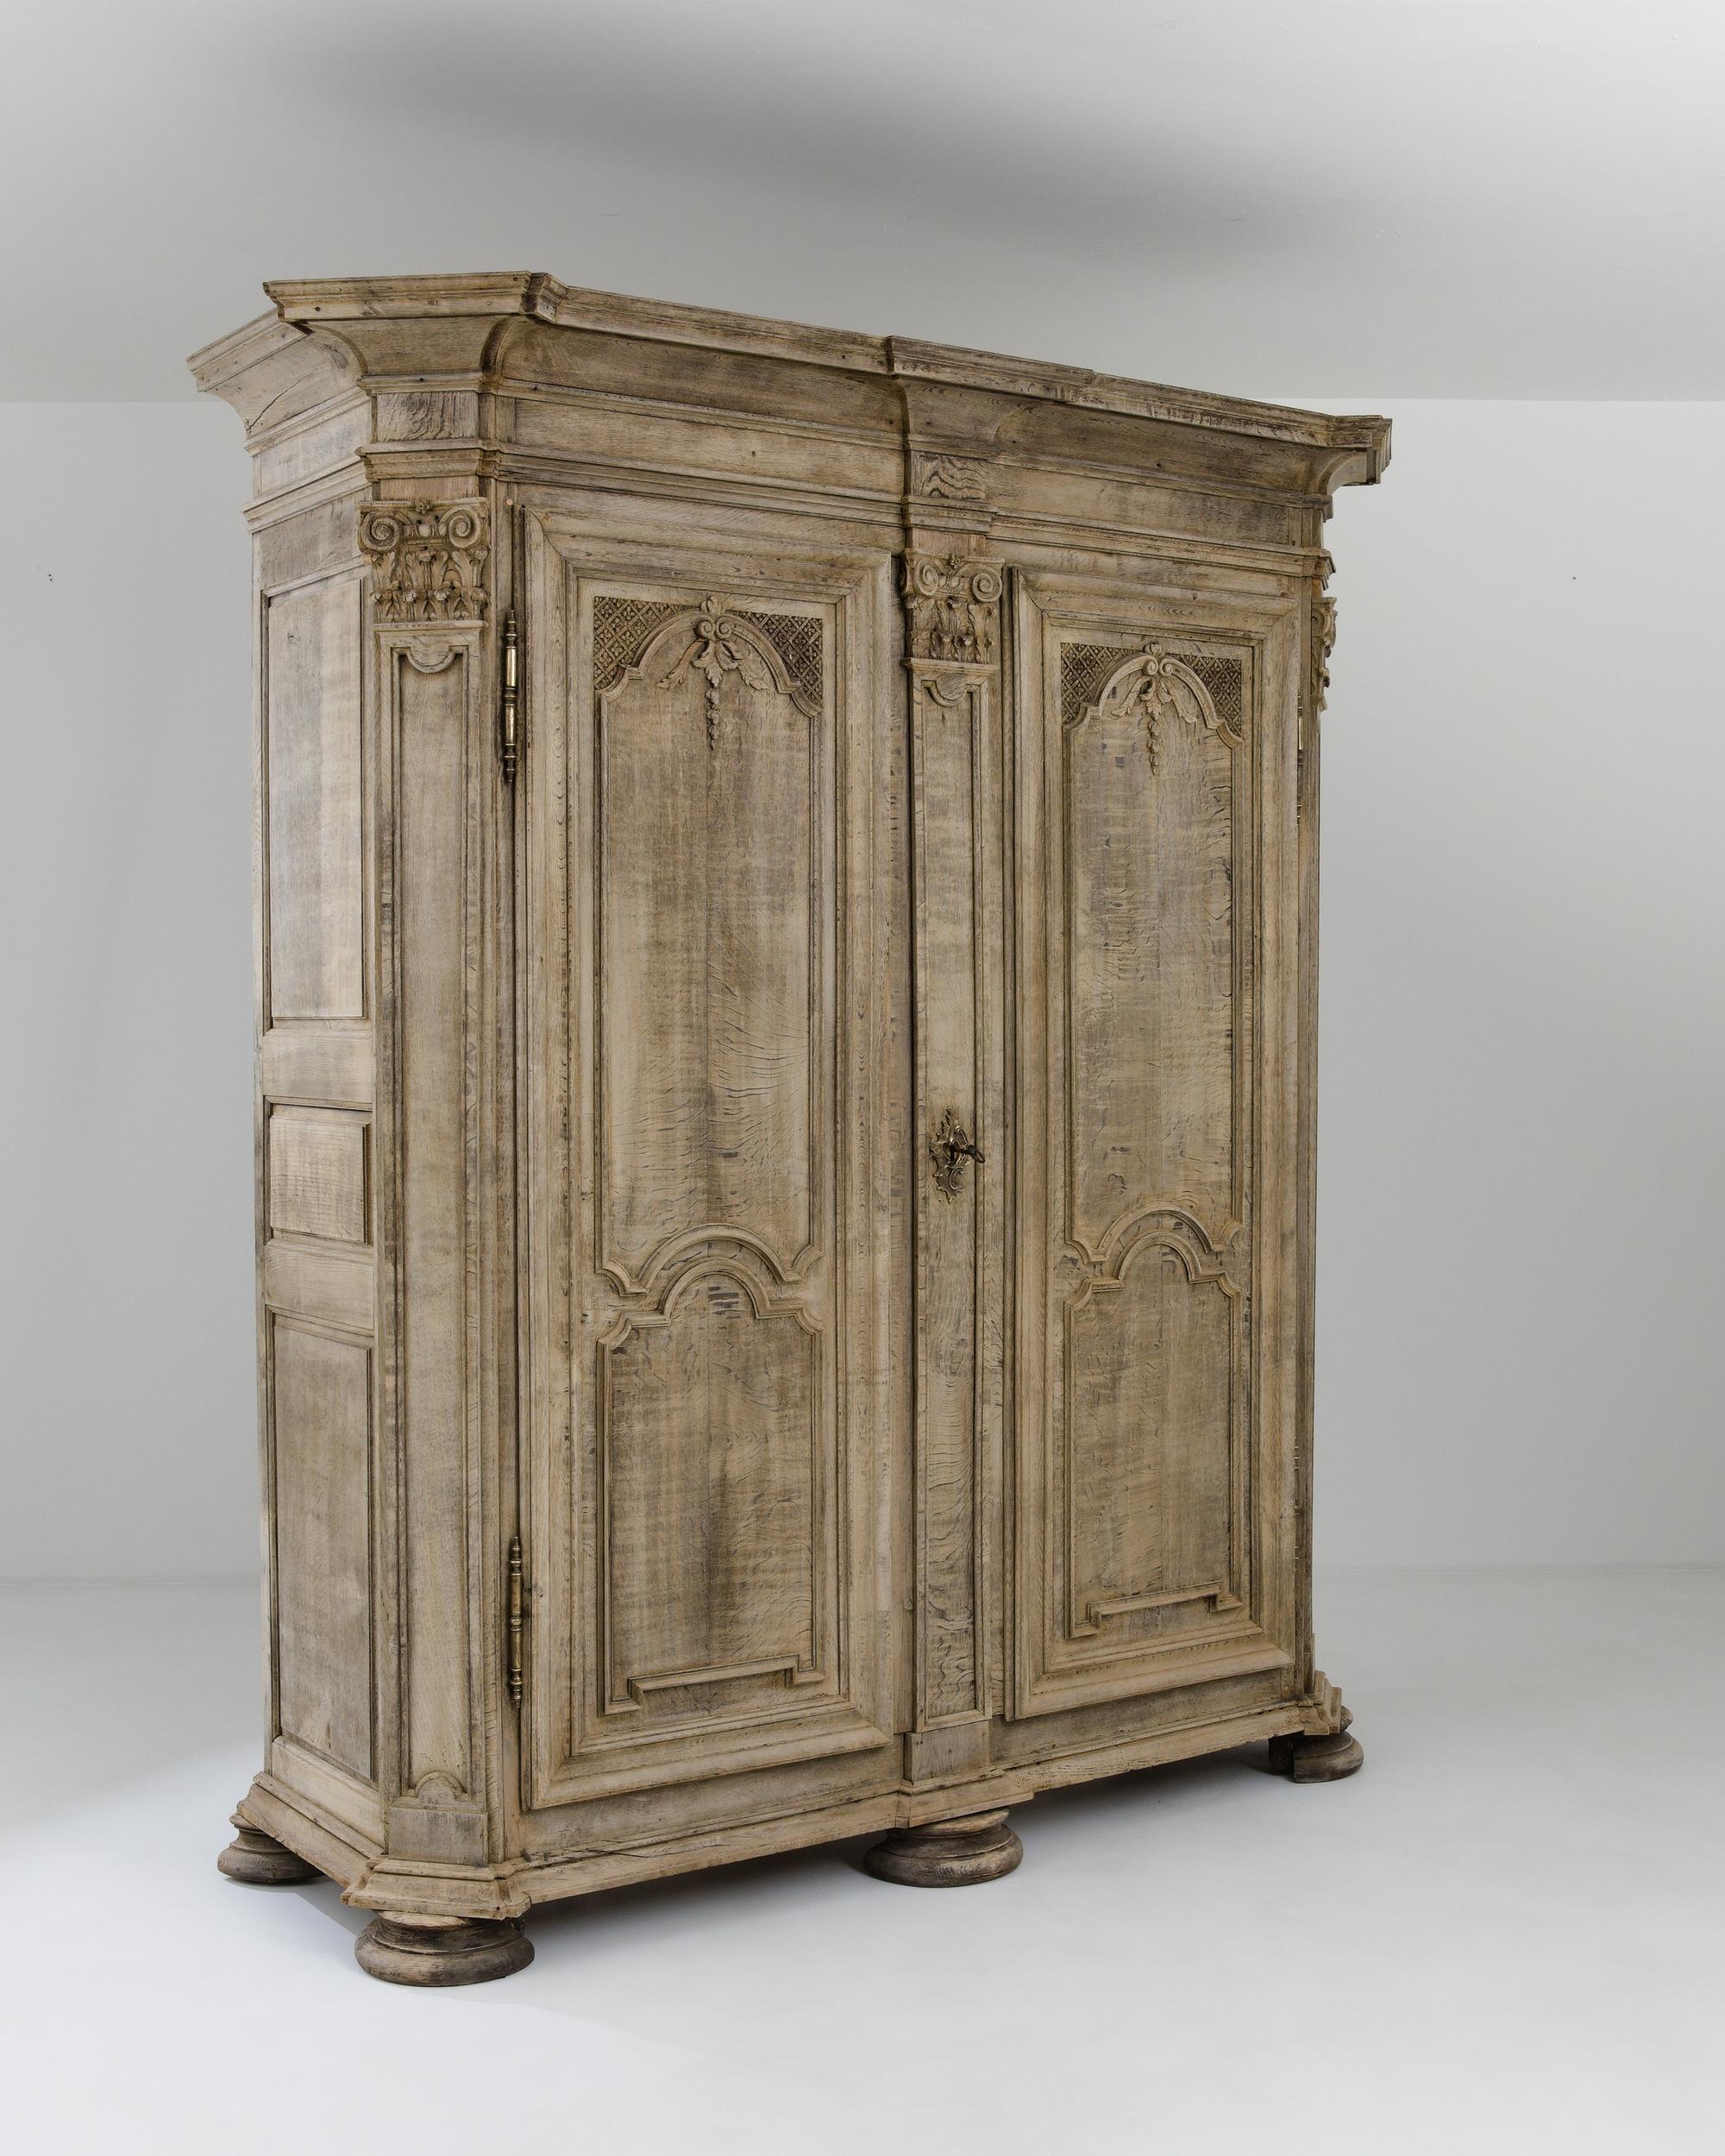 A wooden wardrobe created in France circa 1800. Towering above, this exquisite cabinet commands an impressive aura. Elaborately carved details dot key areas of the cabinet’s constructions, offering lovely moments of care and levity within its grand